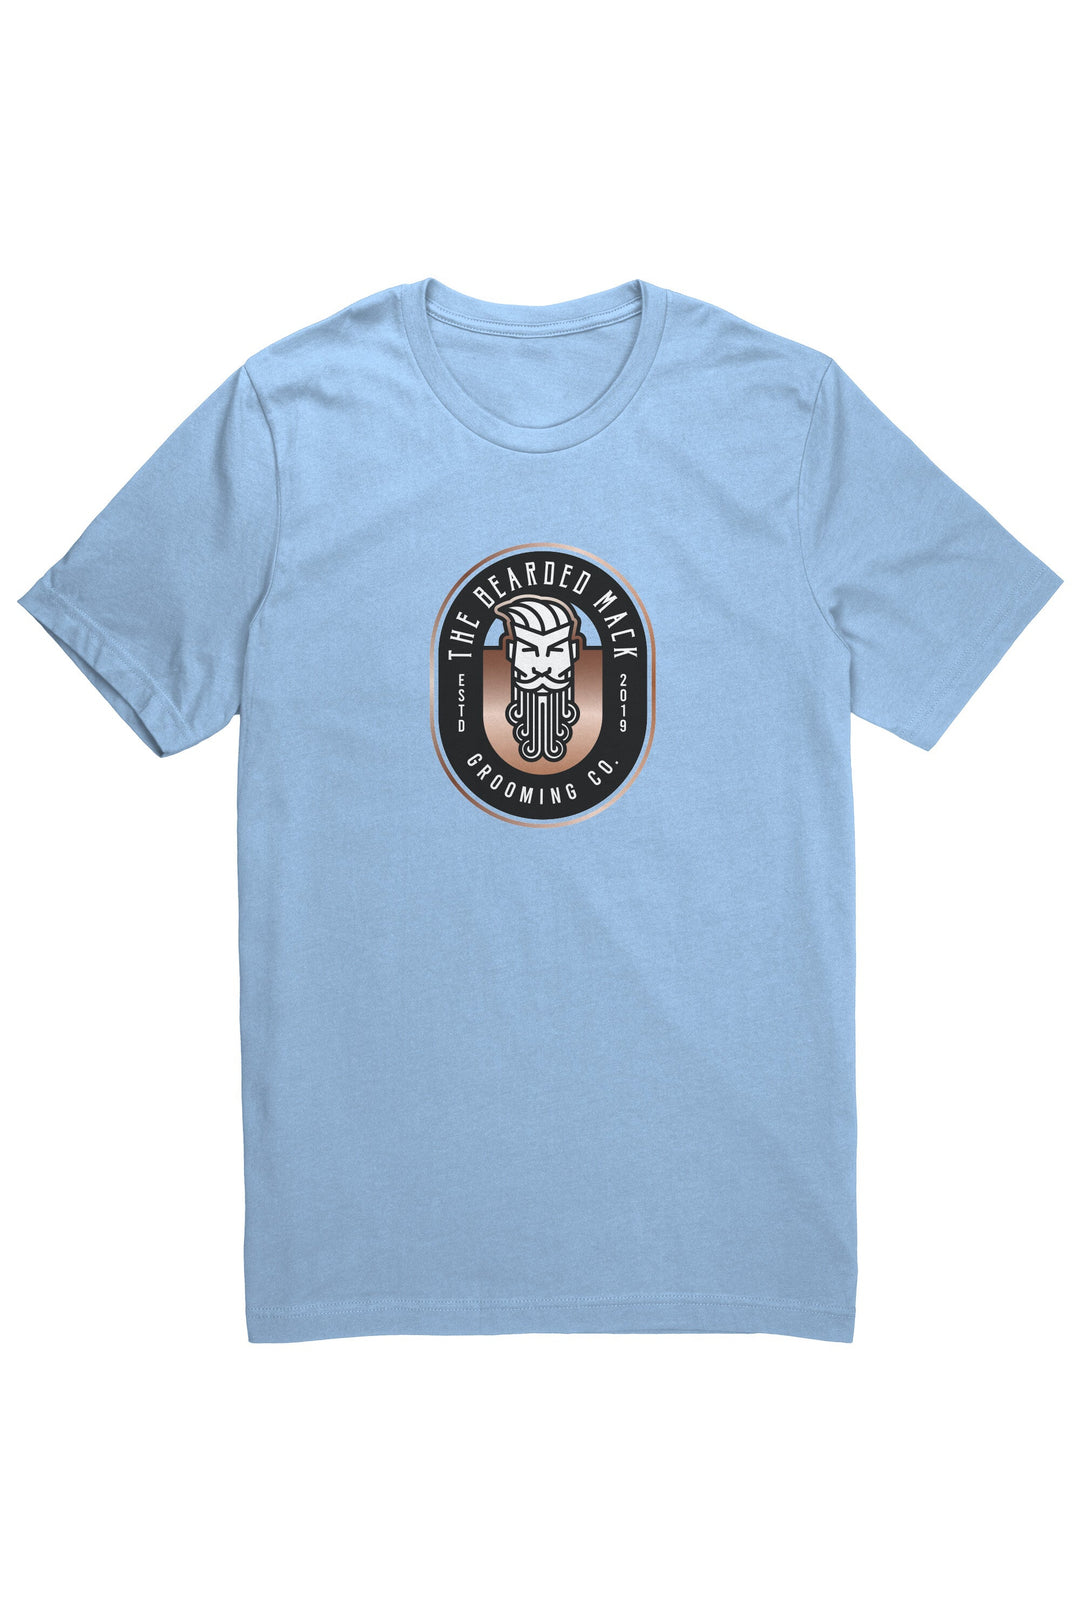 The Natural Tee Apparel teelaunch Baby Blue S 